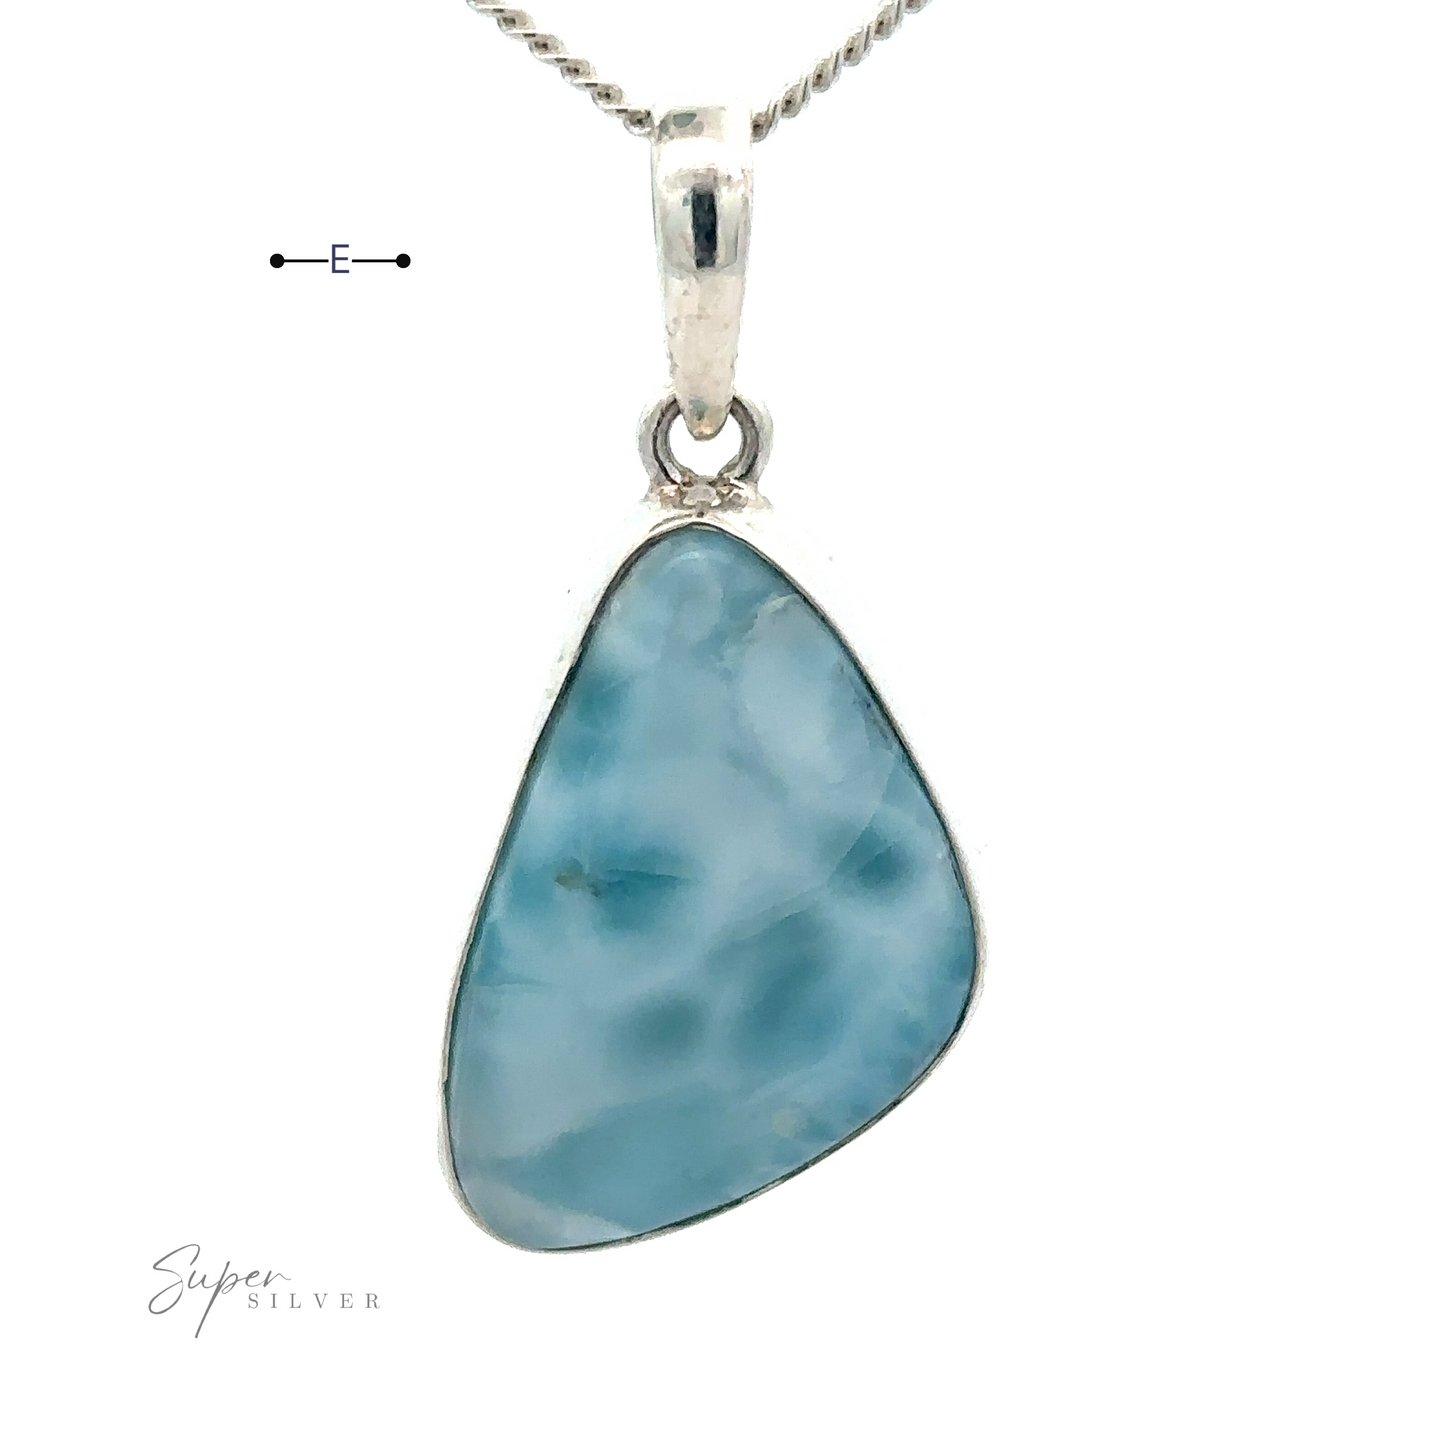 
                  
                    A pendant necklace with a Sterling Silver chain holding a triangular blue Larimar stone. "Freeform Shape Larimar Pendants" is written in the lower left corner.
                  
                